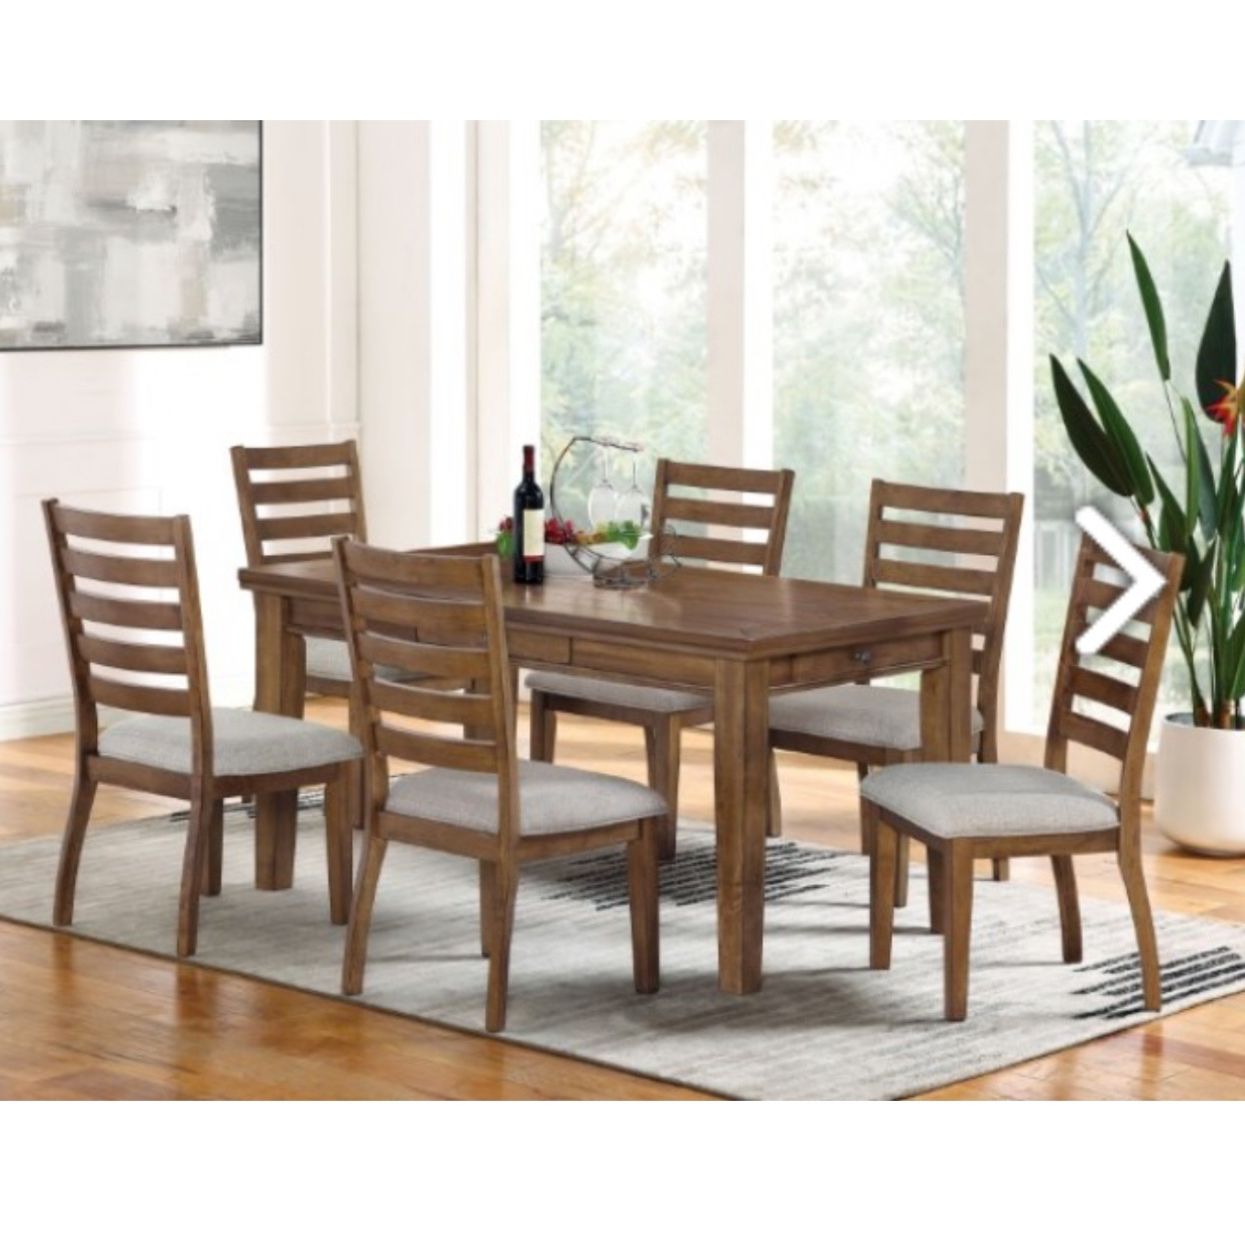 7PC DINING SET (FREE DELIVERY)